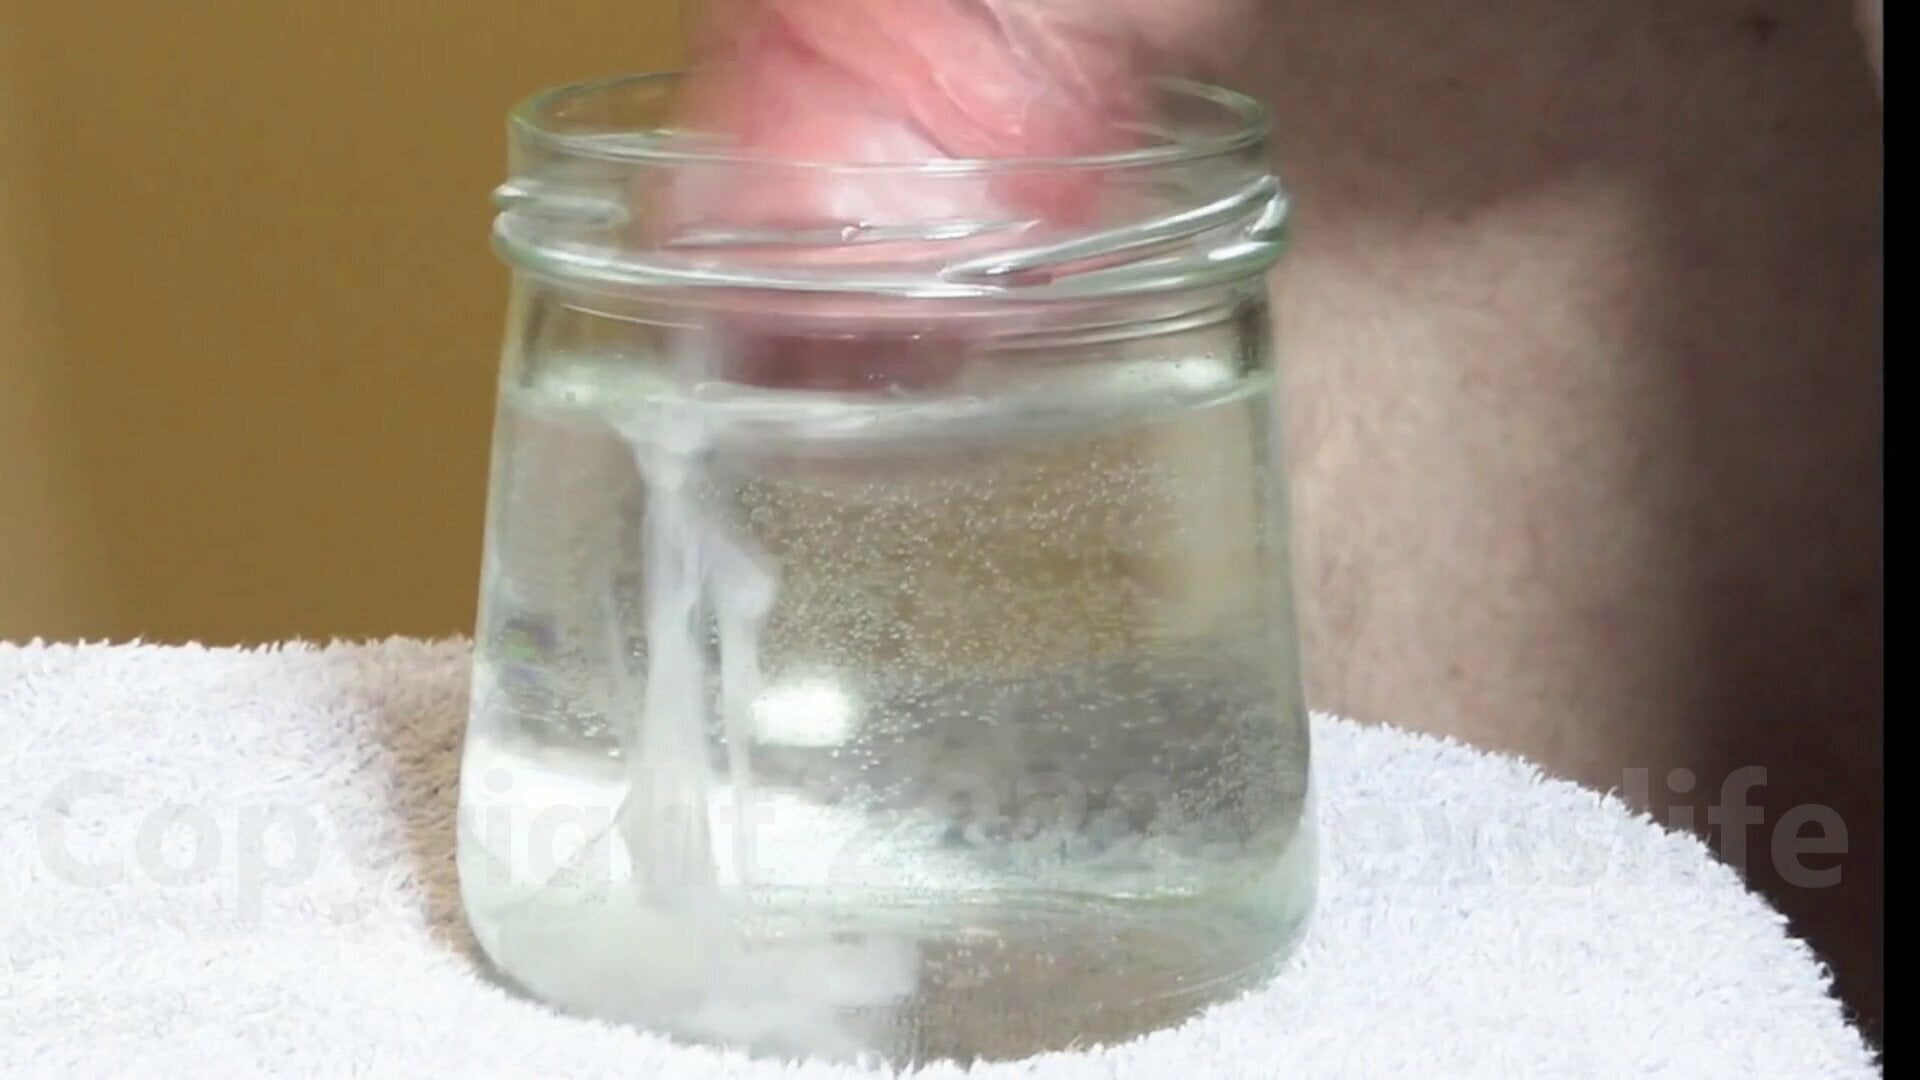 3 Submarine Cumshots in glass of water + slow motion - 8